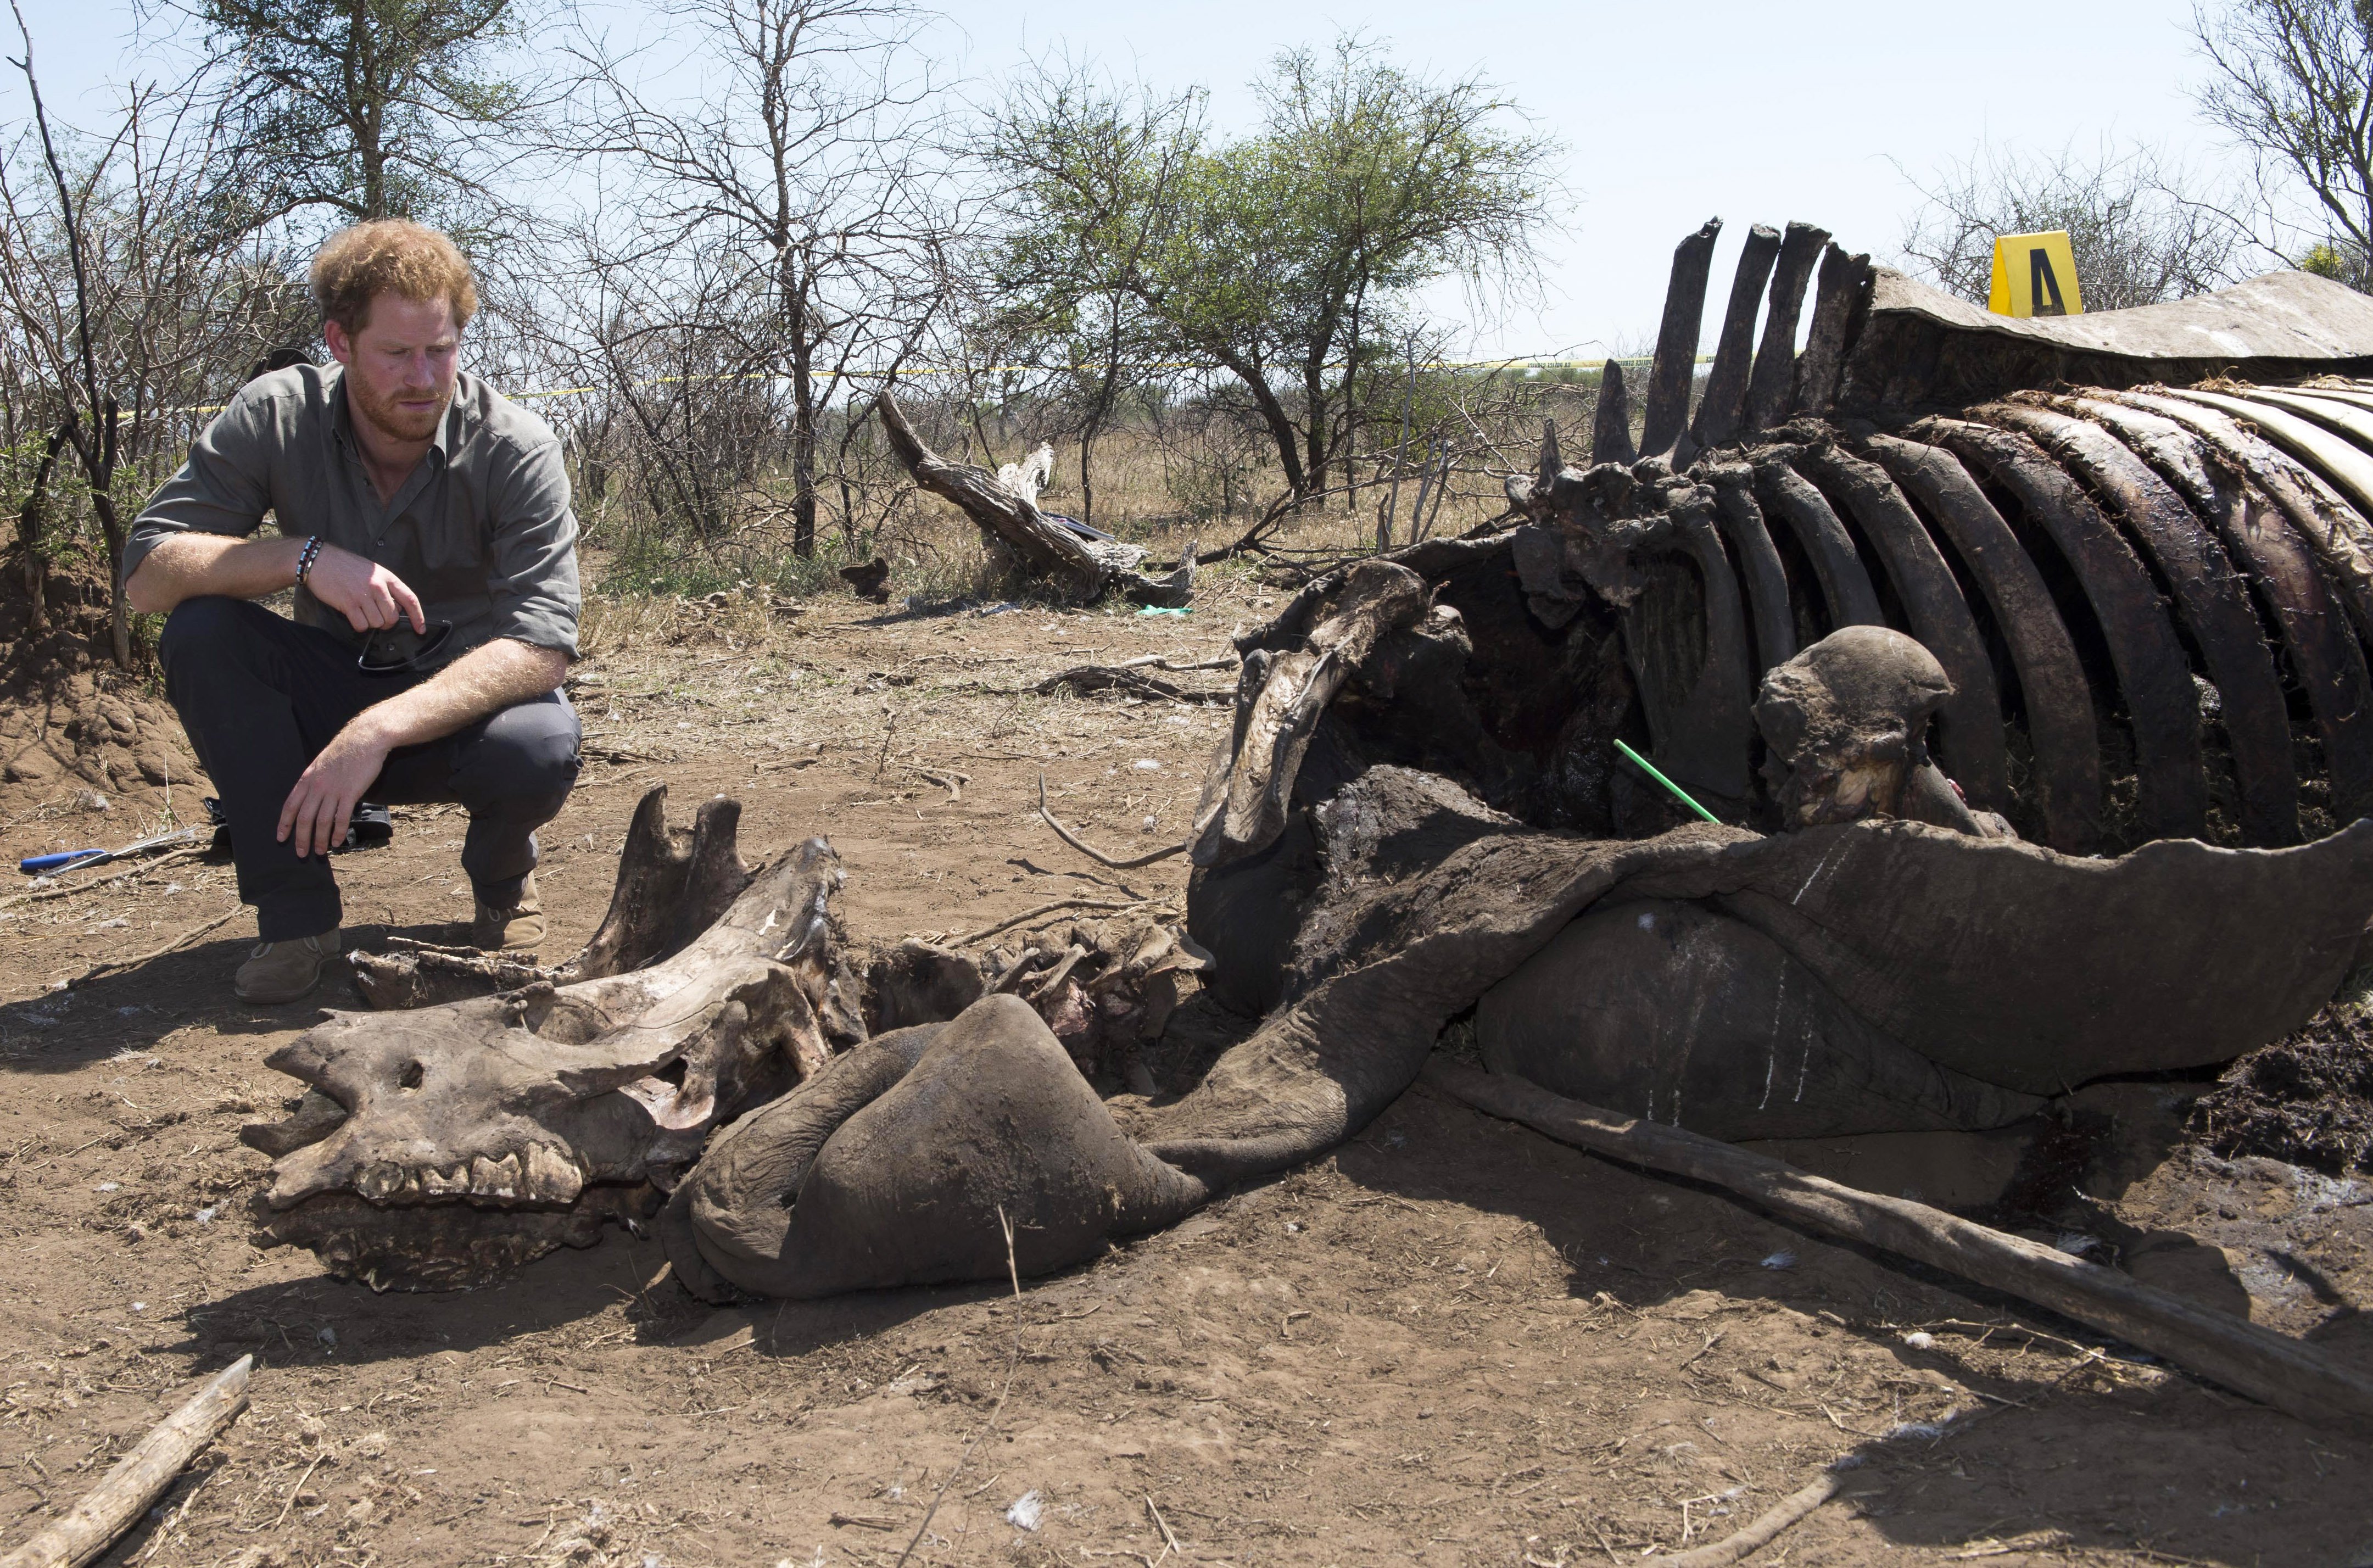 Prince Harry looks at the carcass of a rhino which was killed by poachers in Kruger National Park in Nelspruit, South Africa on Dec. 2, 2015. (Paul Edwards—Getty Images)